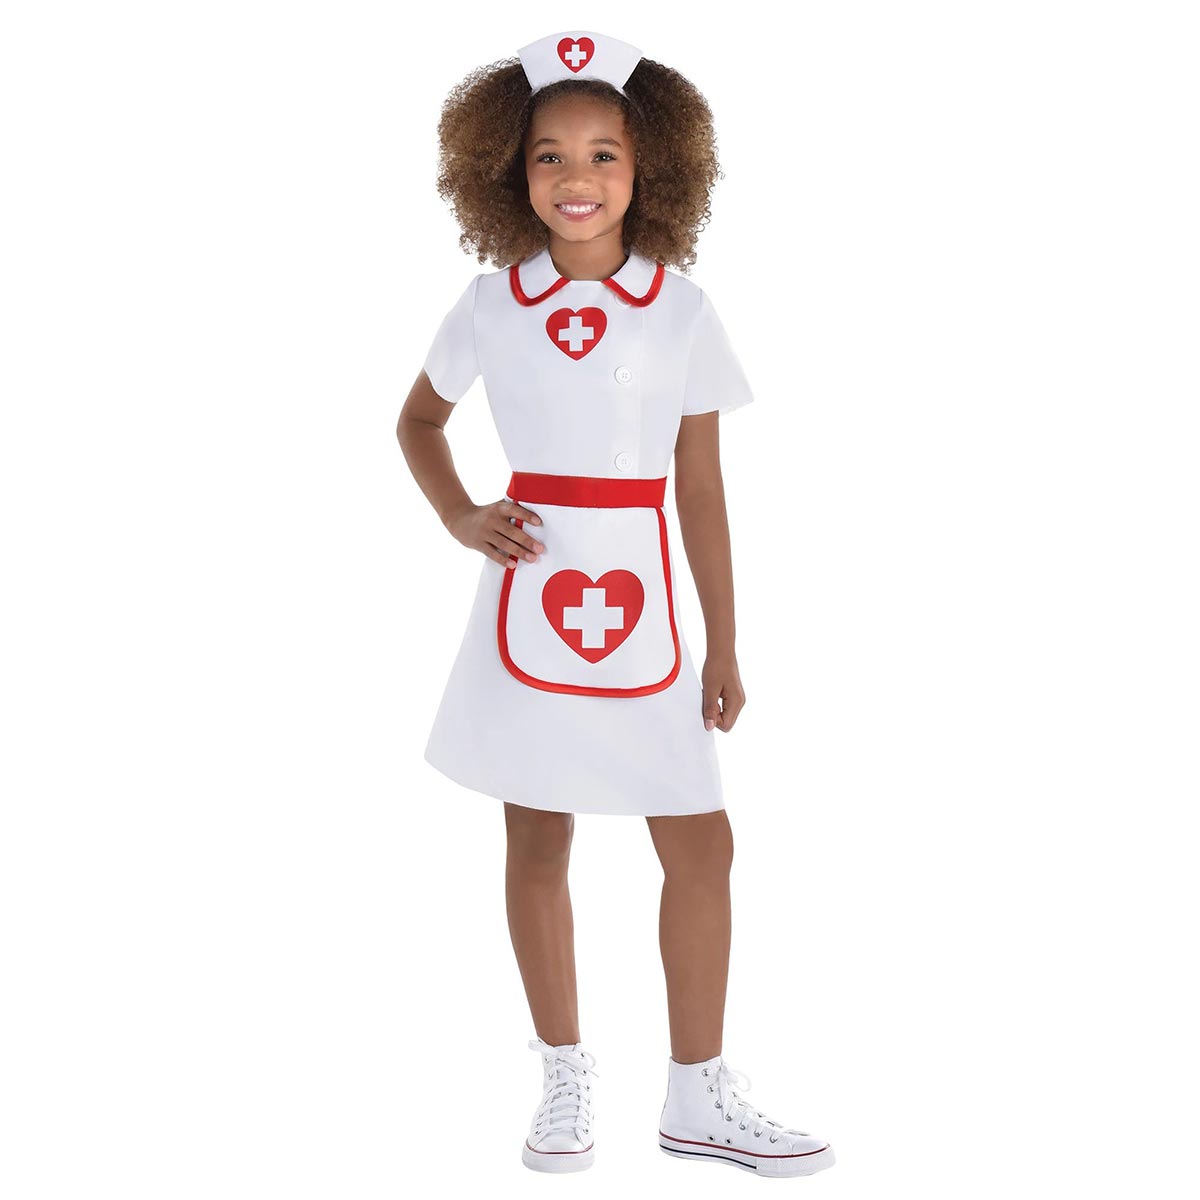 Sweetheart Nurse Costume for Kids, White and Red Dress